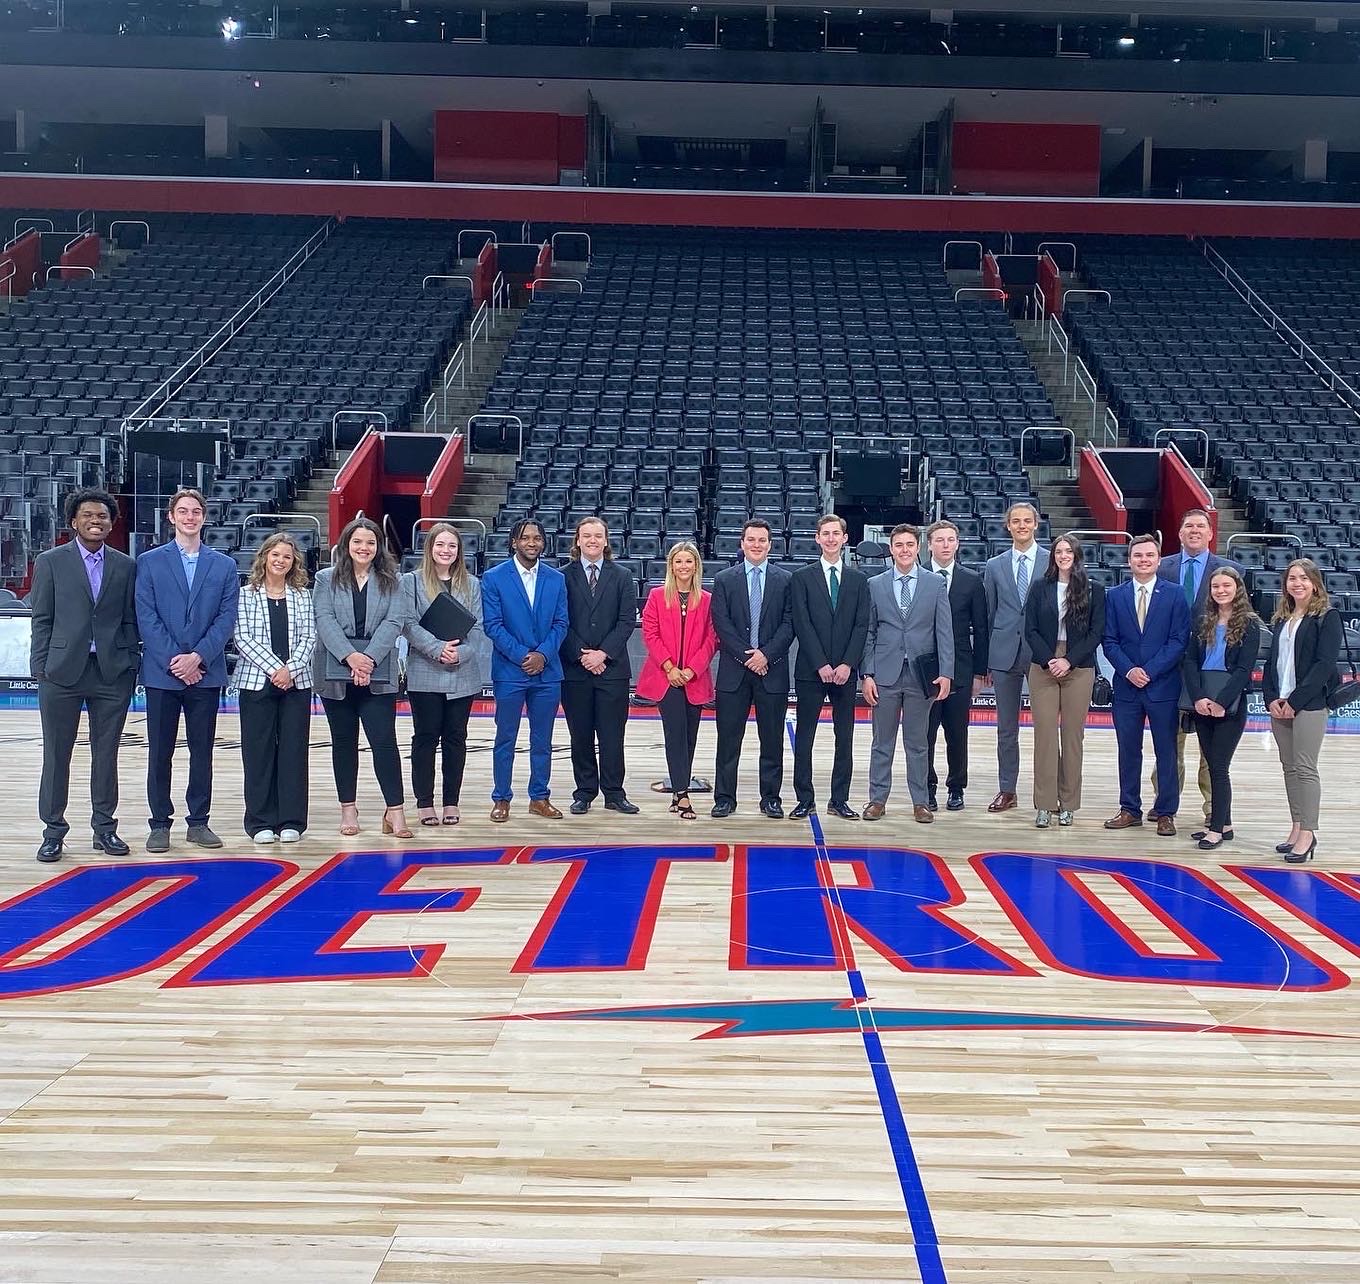 A group of Ohio University students stand together on the Detroit Pistons' court